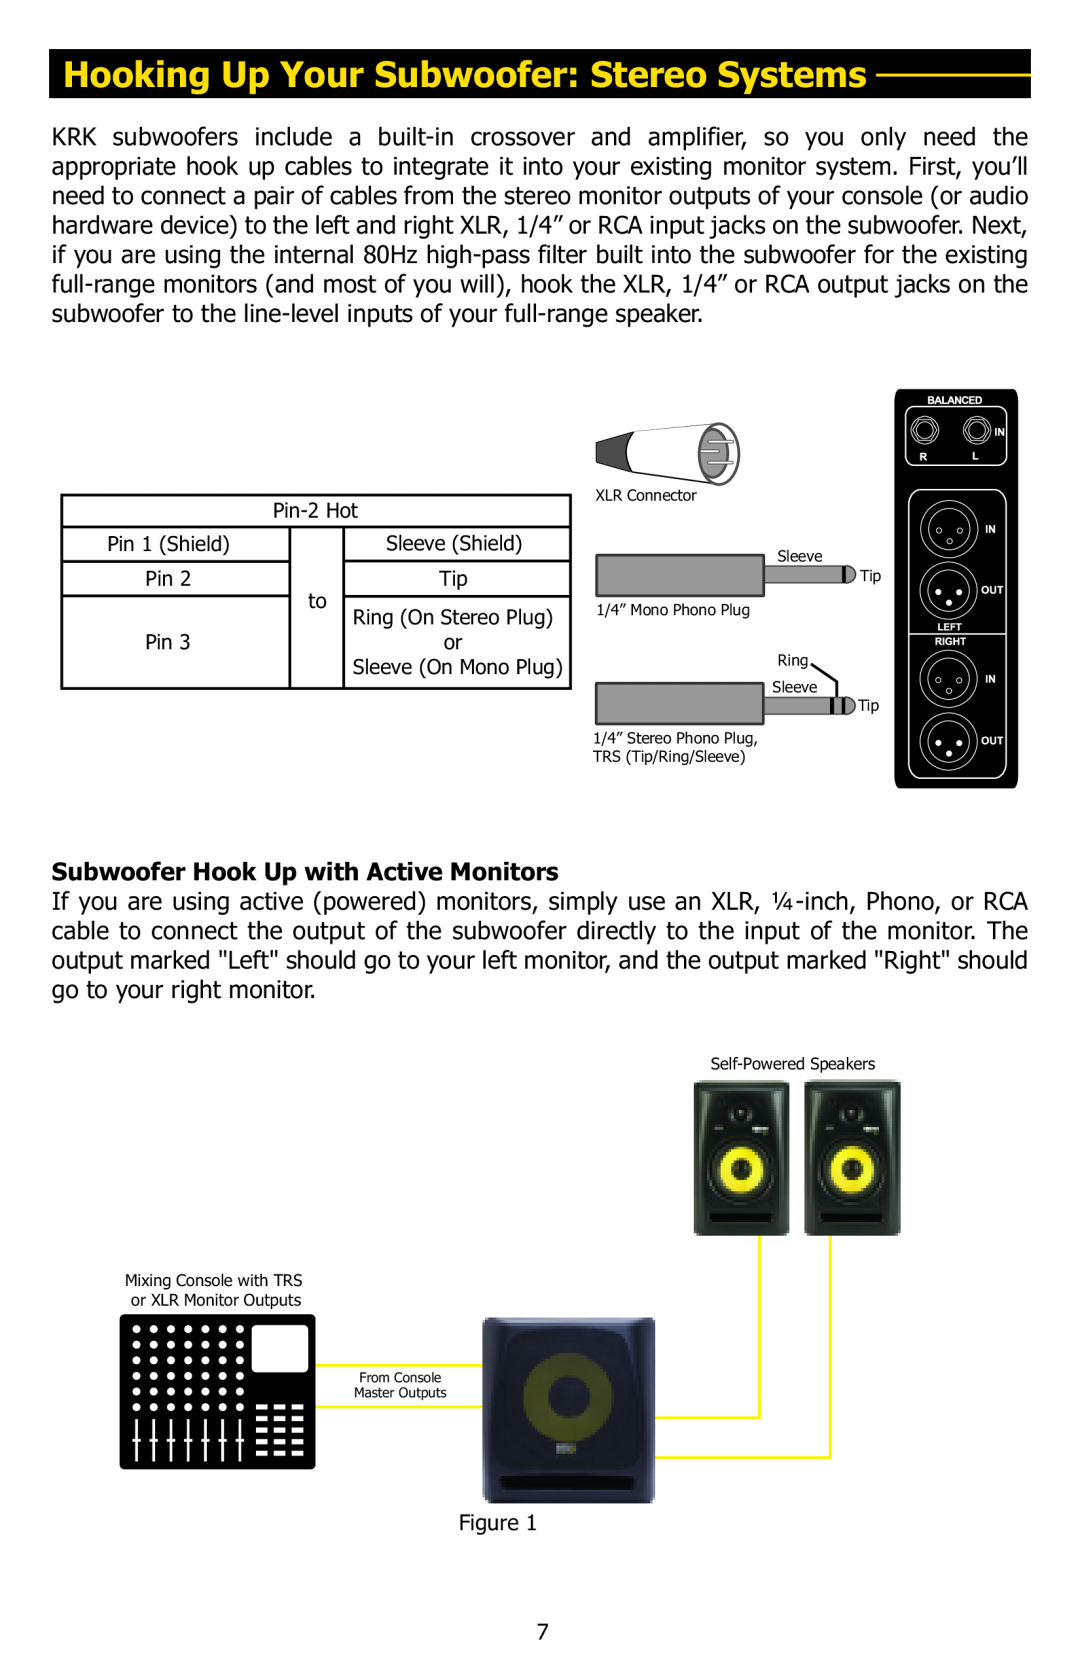 KRK 10S manual Hooking Up Your Subwoofer Stereo Systems, Subwoofer Hook Up with Active Monitors 